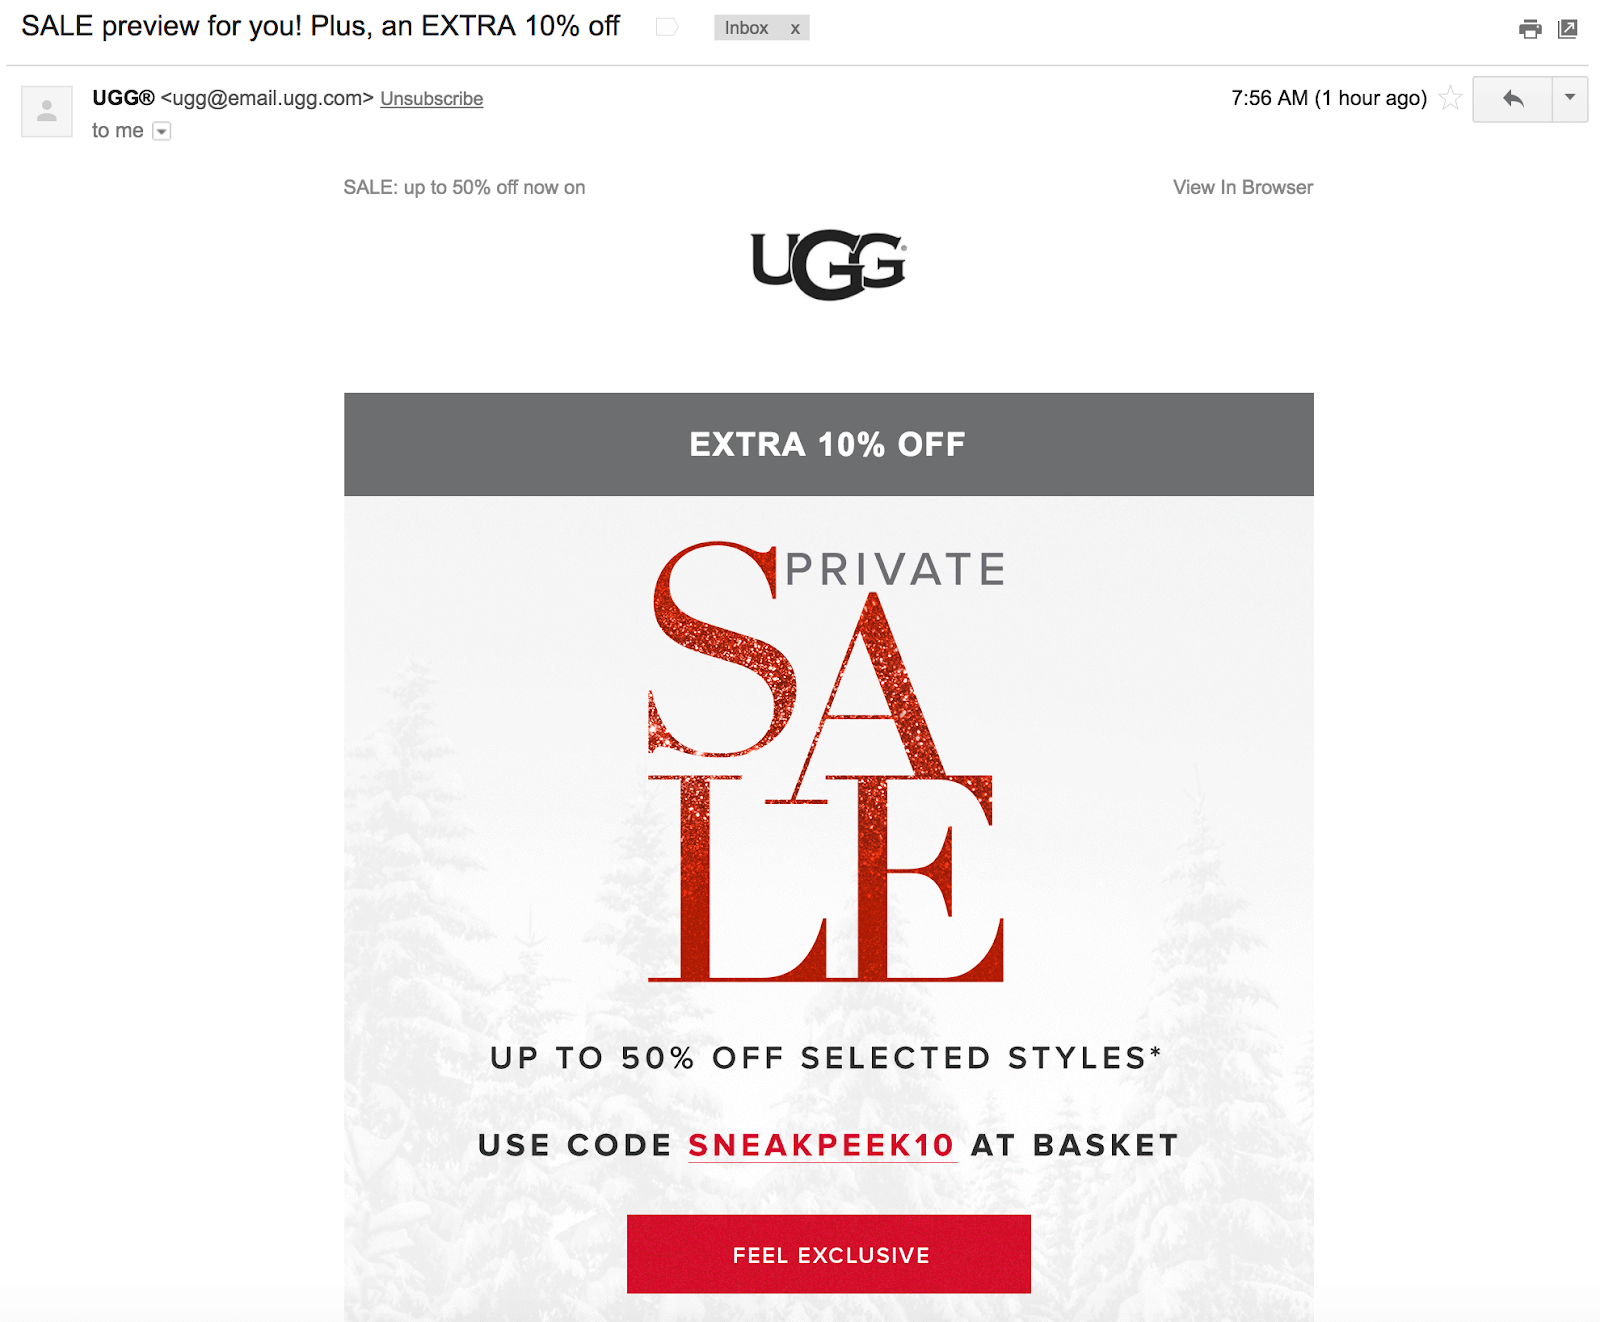 Screenshot showing an email by Ugg